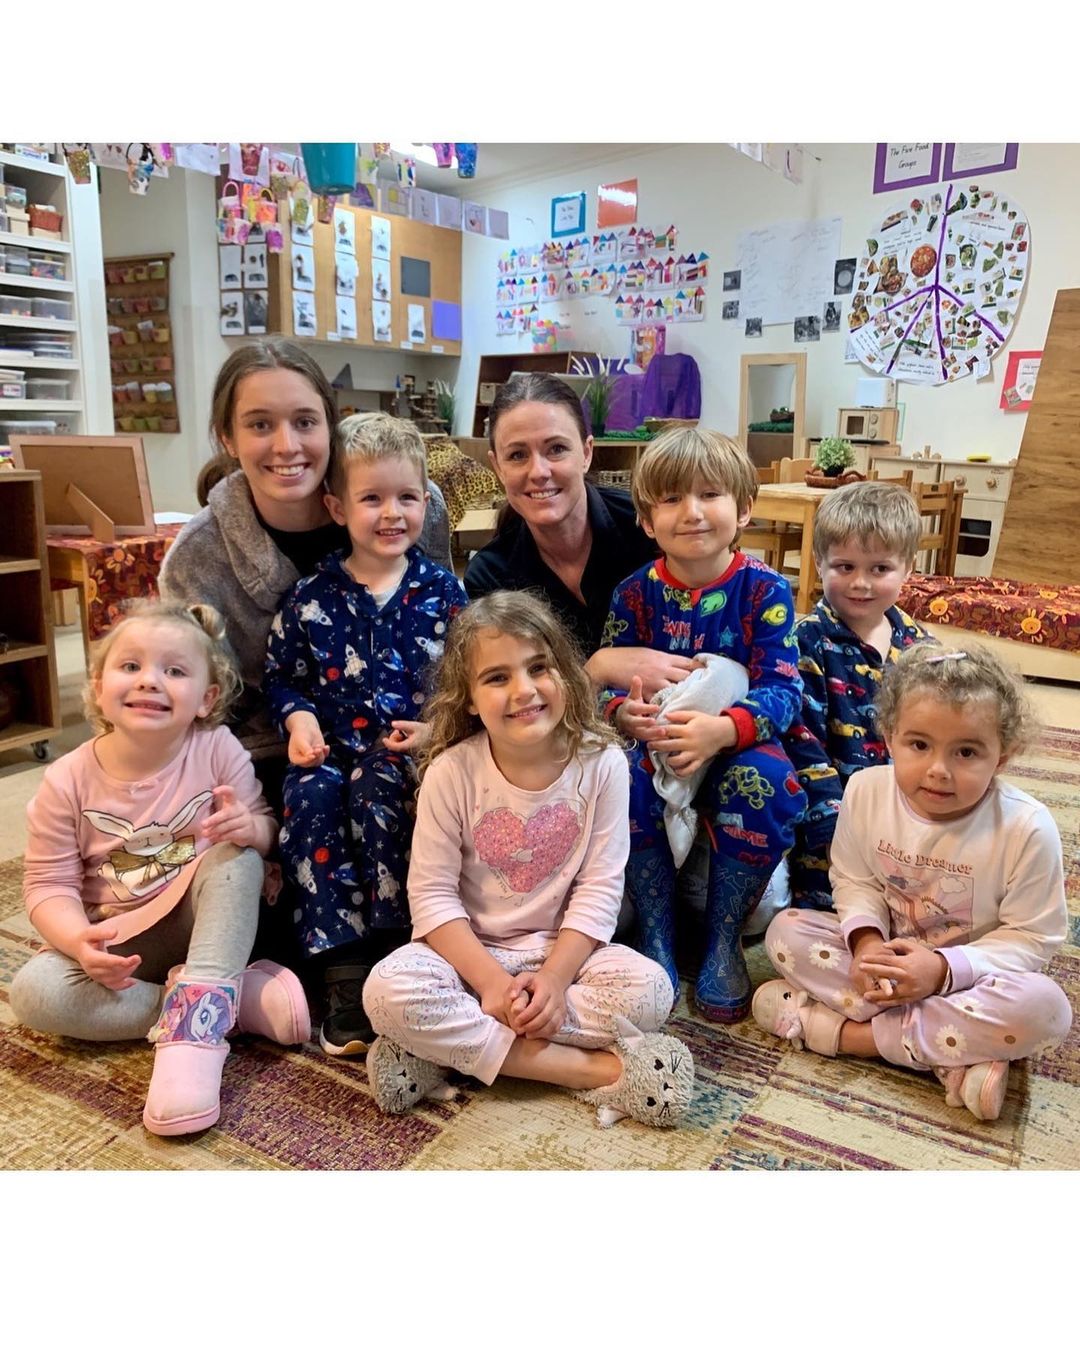 Wow! What a fun and comfy week wearing our pyjamas to kindy!👫👫
.
The children had lots of fun creating cubby houses, having pyjama parties and making their own art and craft pjs
.
It was so lovely to see all our children and teachers having fun and dressing up 
 .
Here are some photos from the weeks fun 
💙💚💛🧡❤️💜🤍🖤
.
#childcare #pyjamas #pjweek #pyjamaweek  #slippers #pyjamaparty  #earlylearning #goldcoastchildcare #community #nationalqualitystandards #nationalqualityframework #aheadstartcentres
